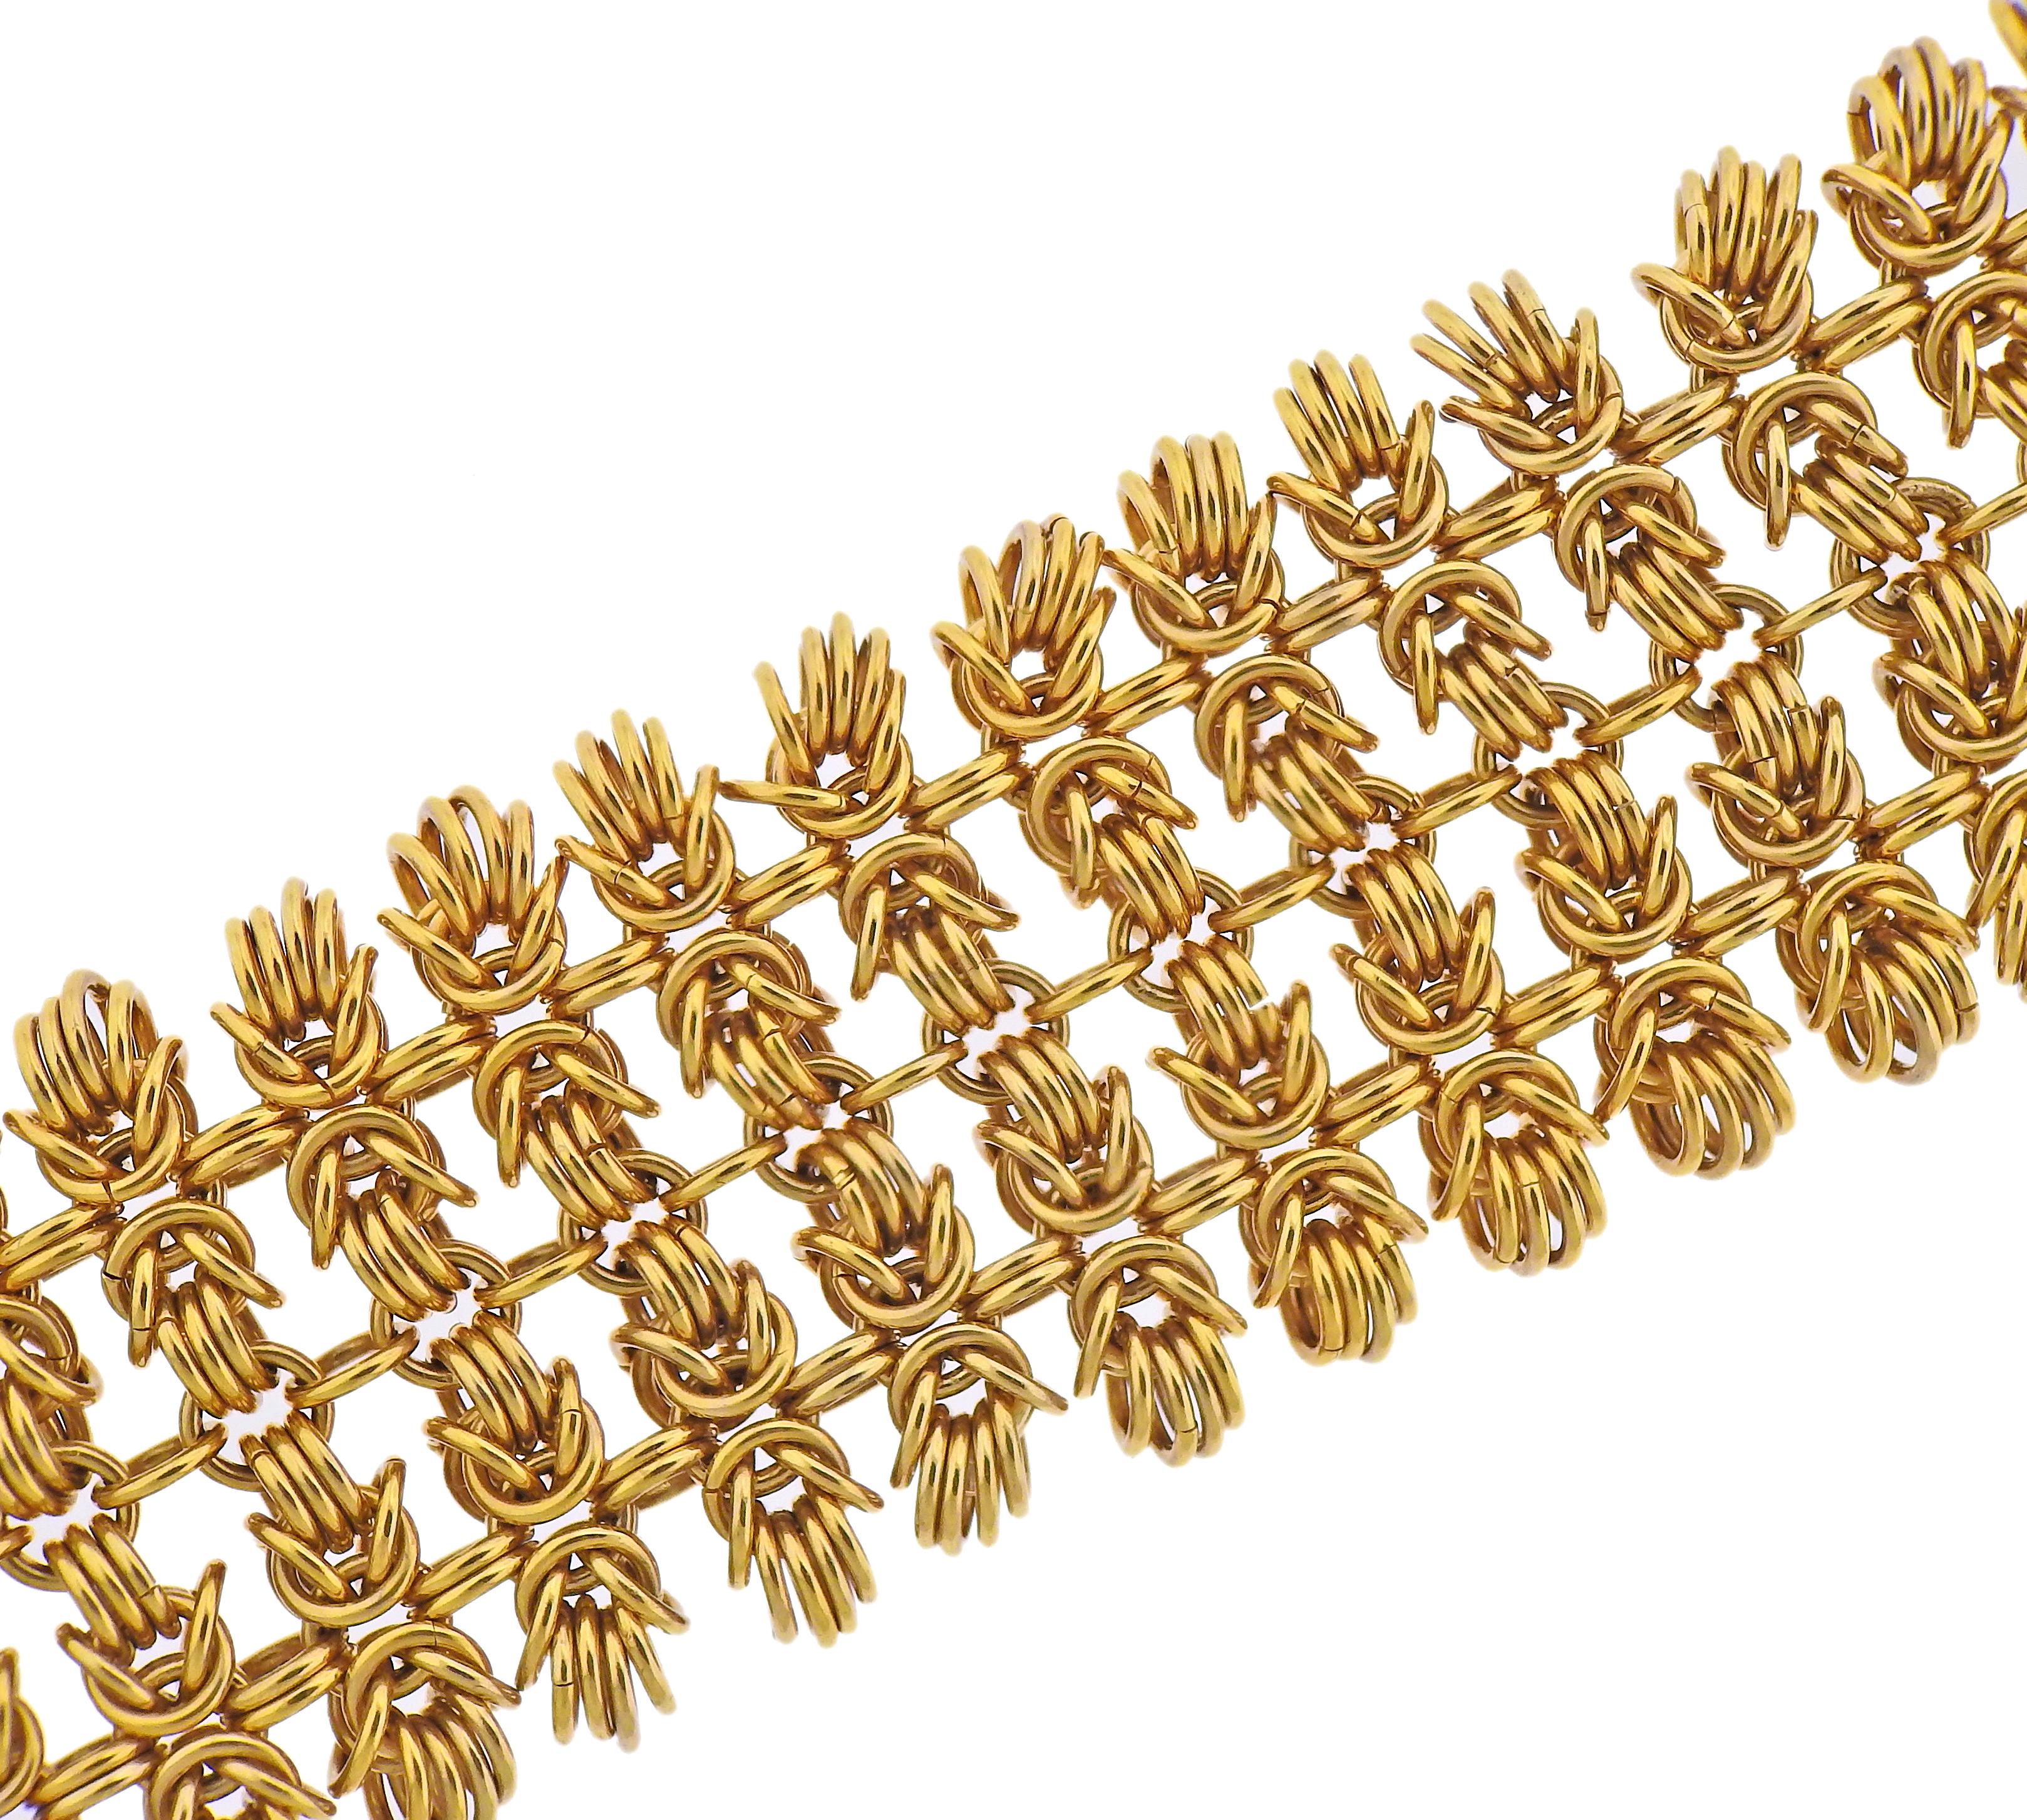 Bulgari Hercules Knot Gold Bracelet In Excellent Condition For Sale In New York, NY